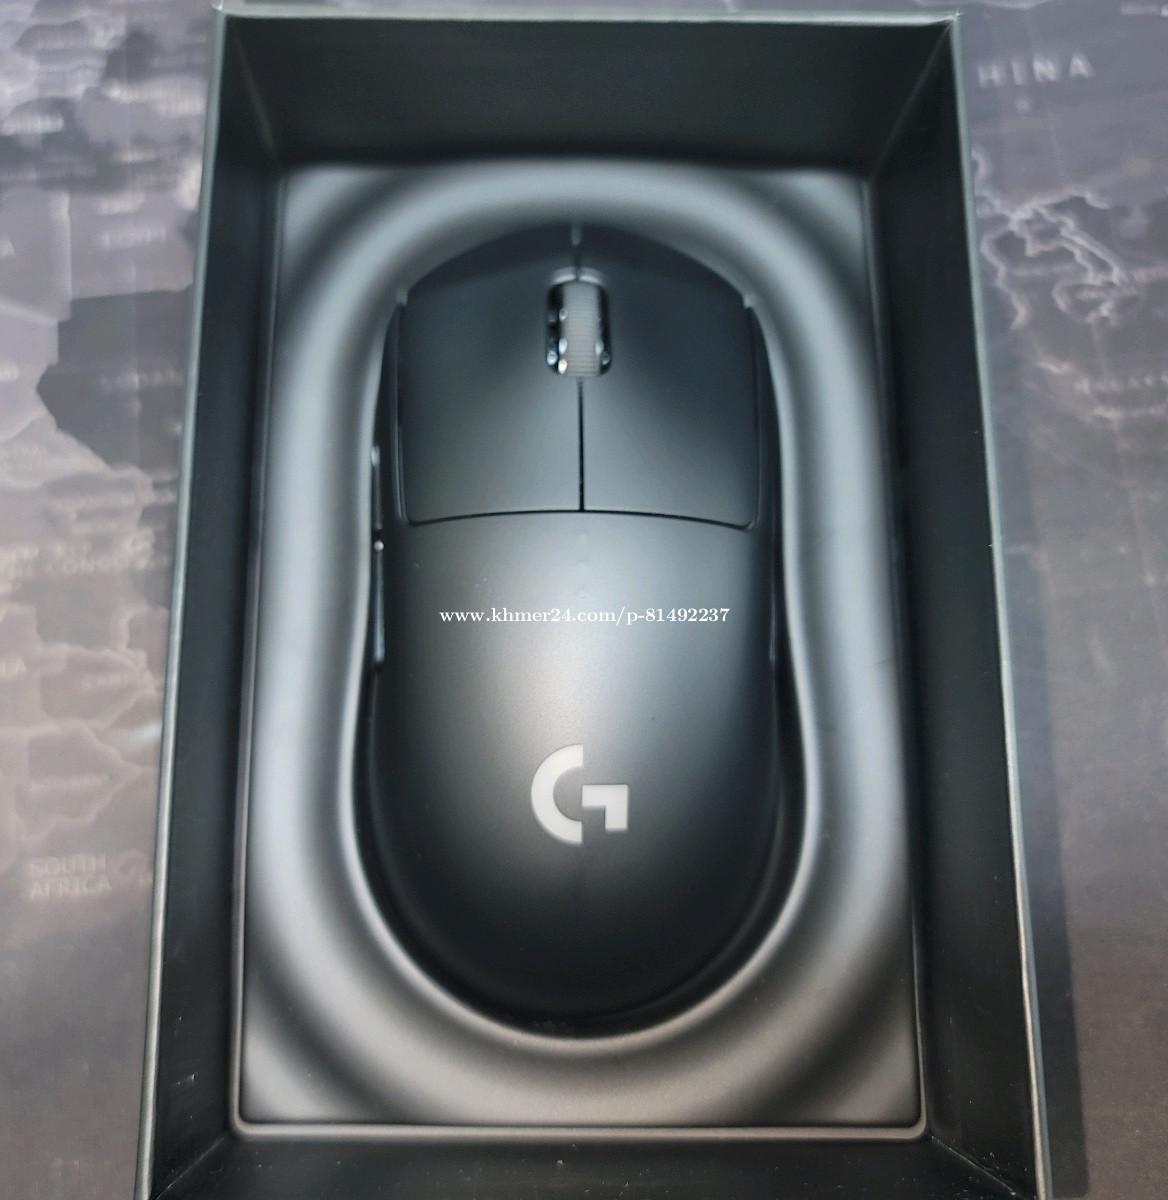 Logitech G Pro Wireless Gaming Mouse with Esports Grade Performance 